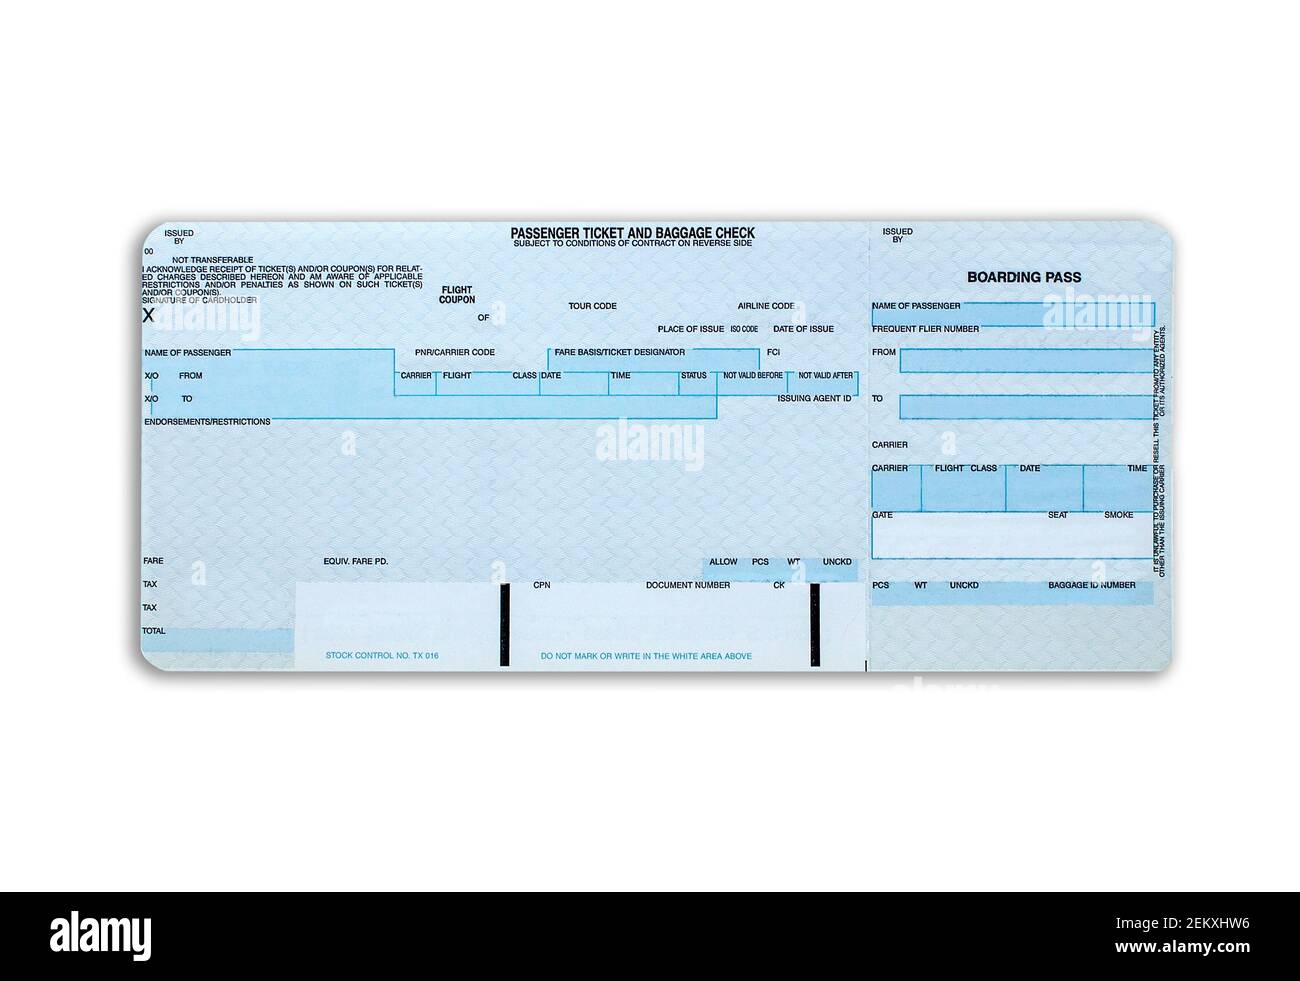 Airline boarding pass ticket and baggage check for traveling by plane isolated on white background. Stock Photo